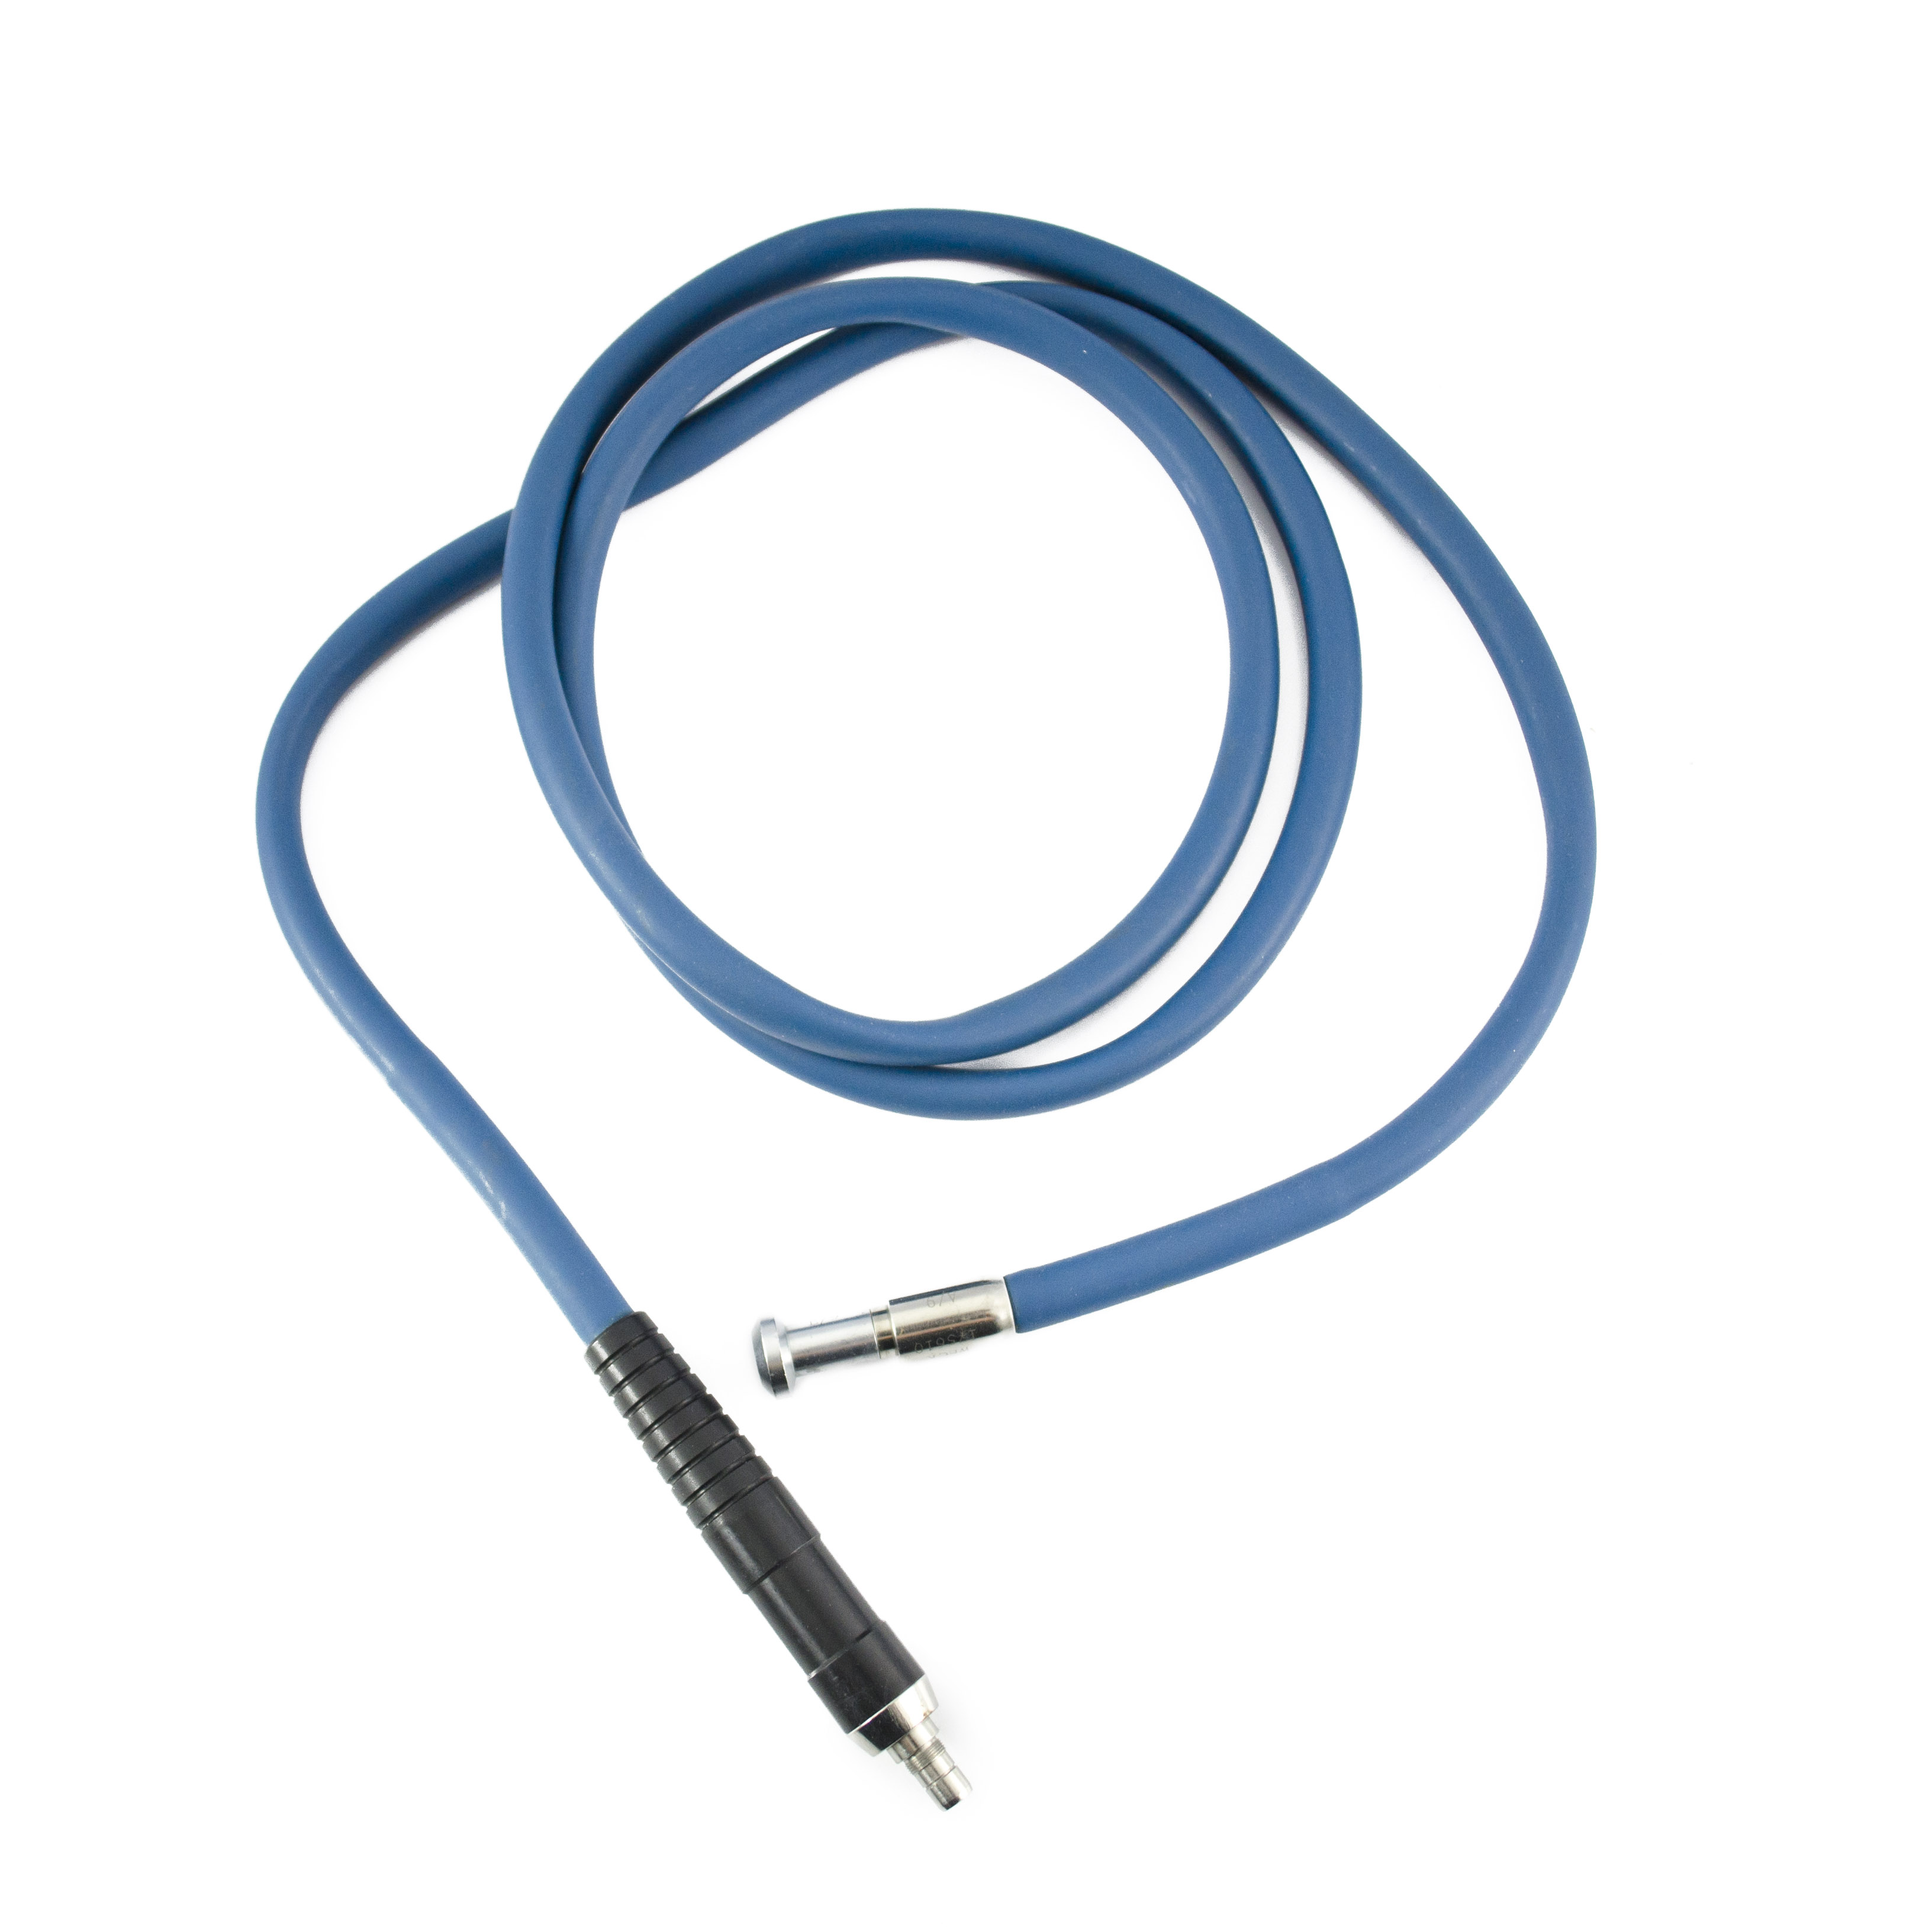 Weck Fiber Optic Light Guide Cable - 175610